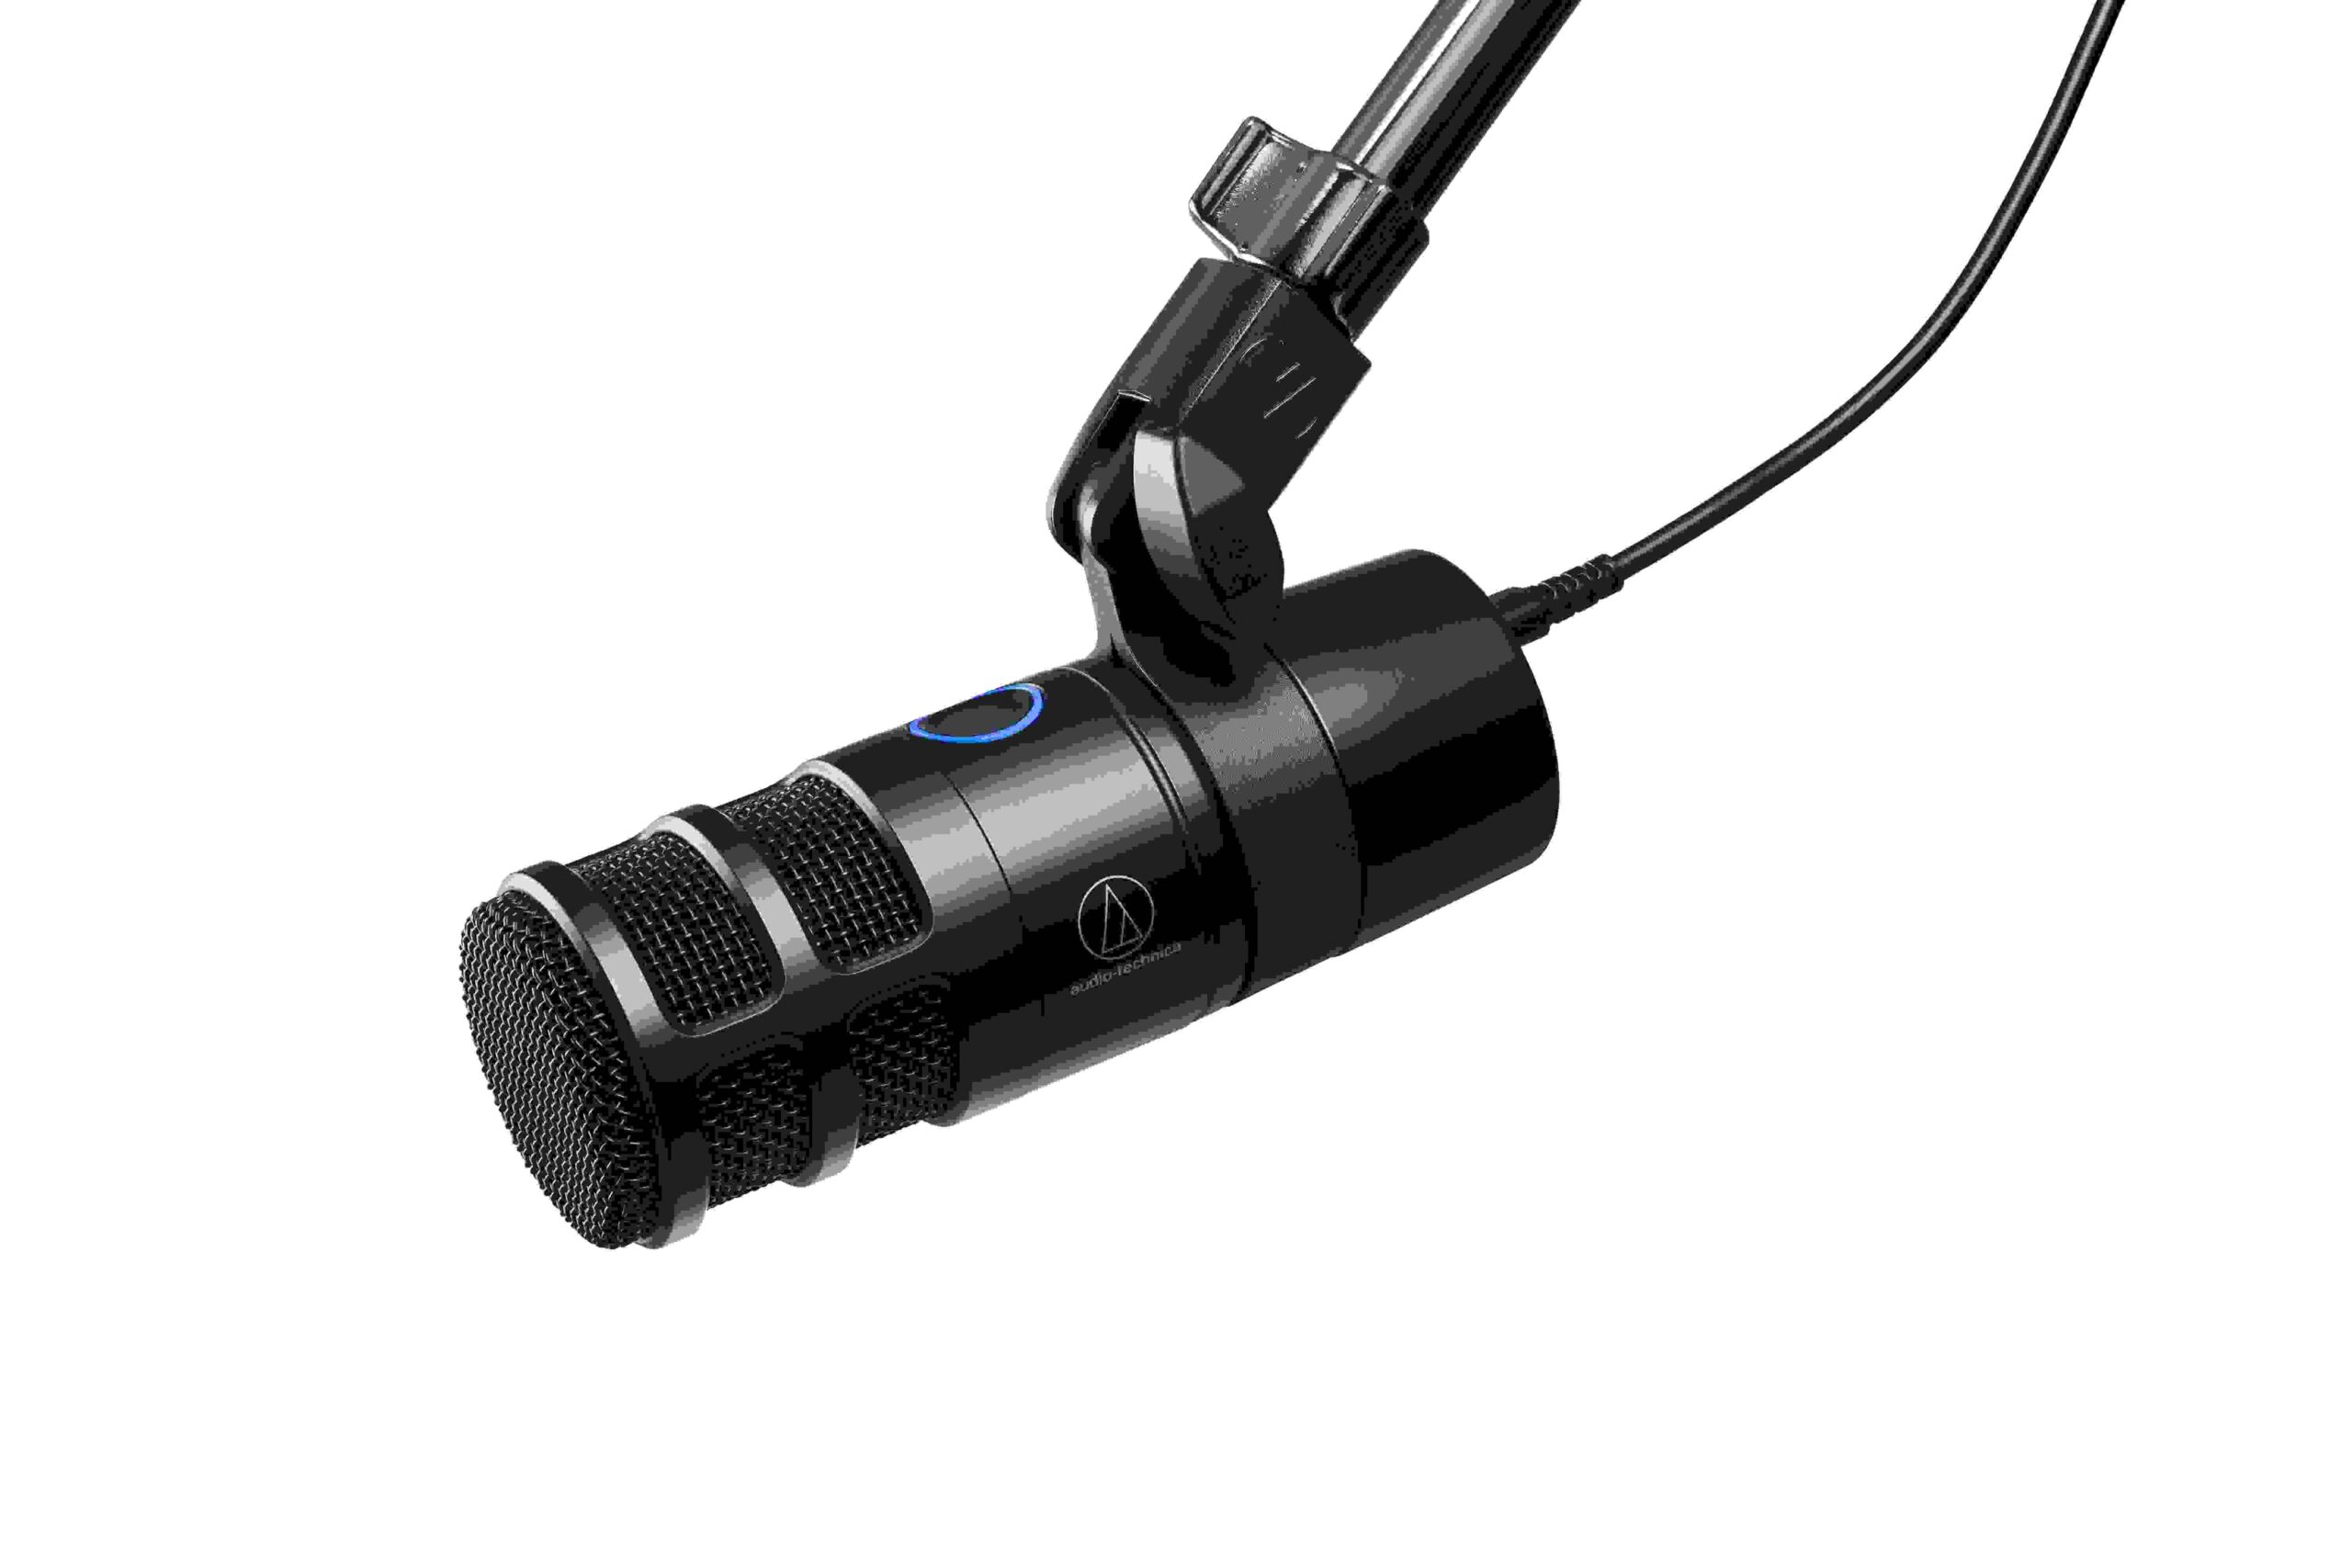 Review: Audio-Technica AT2040USB Microphone